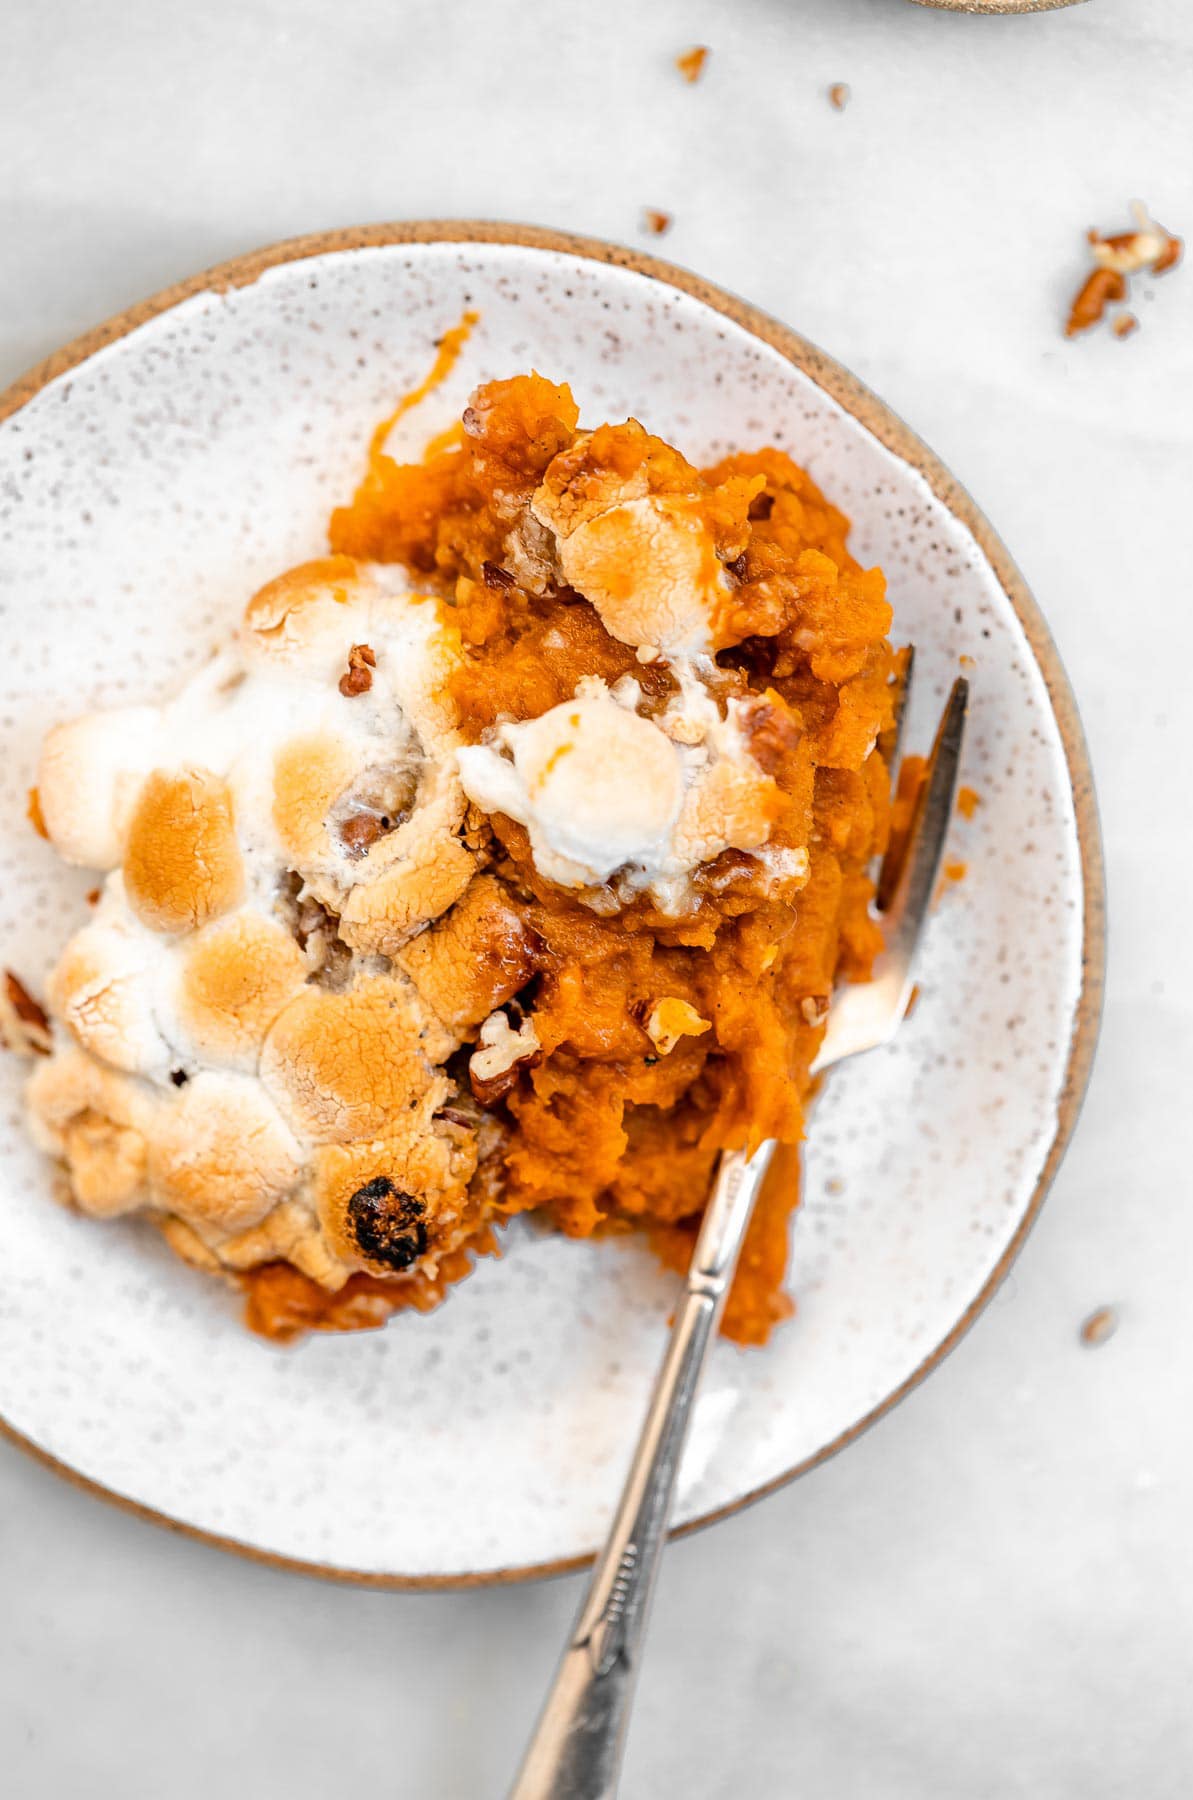 Vegan sweet potato casserole on a small plate with a fork.